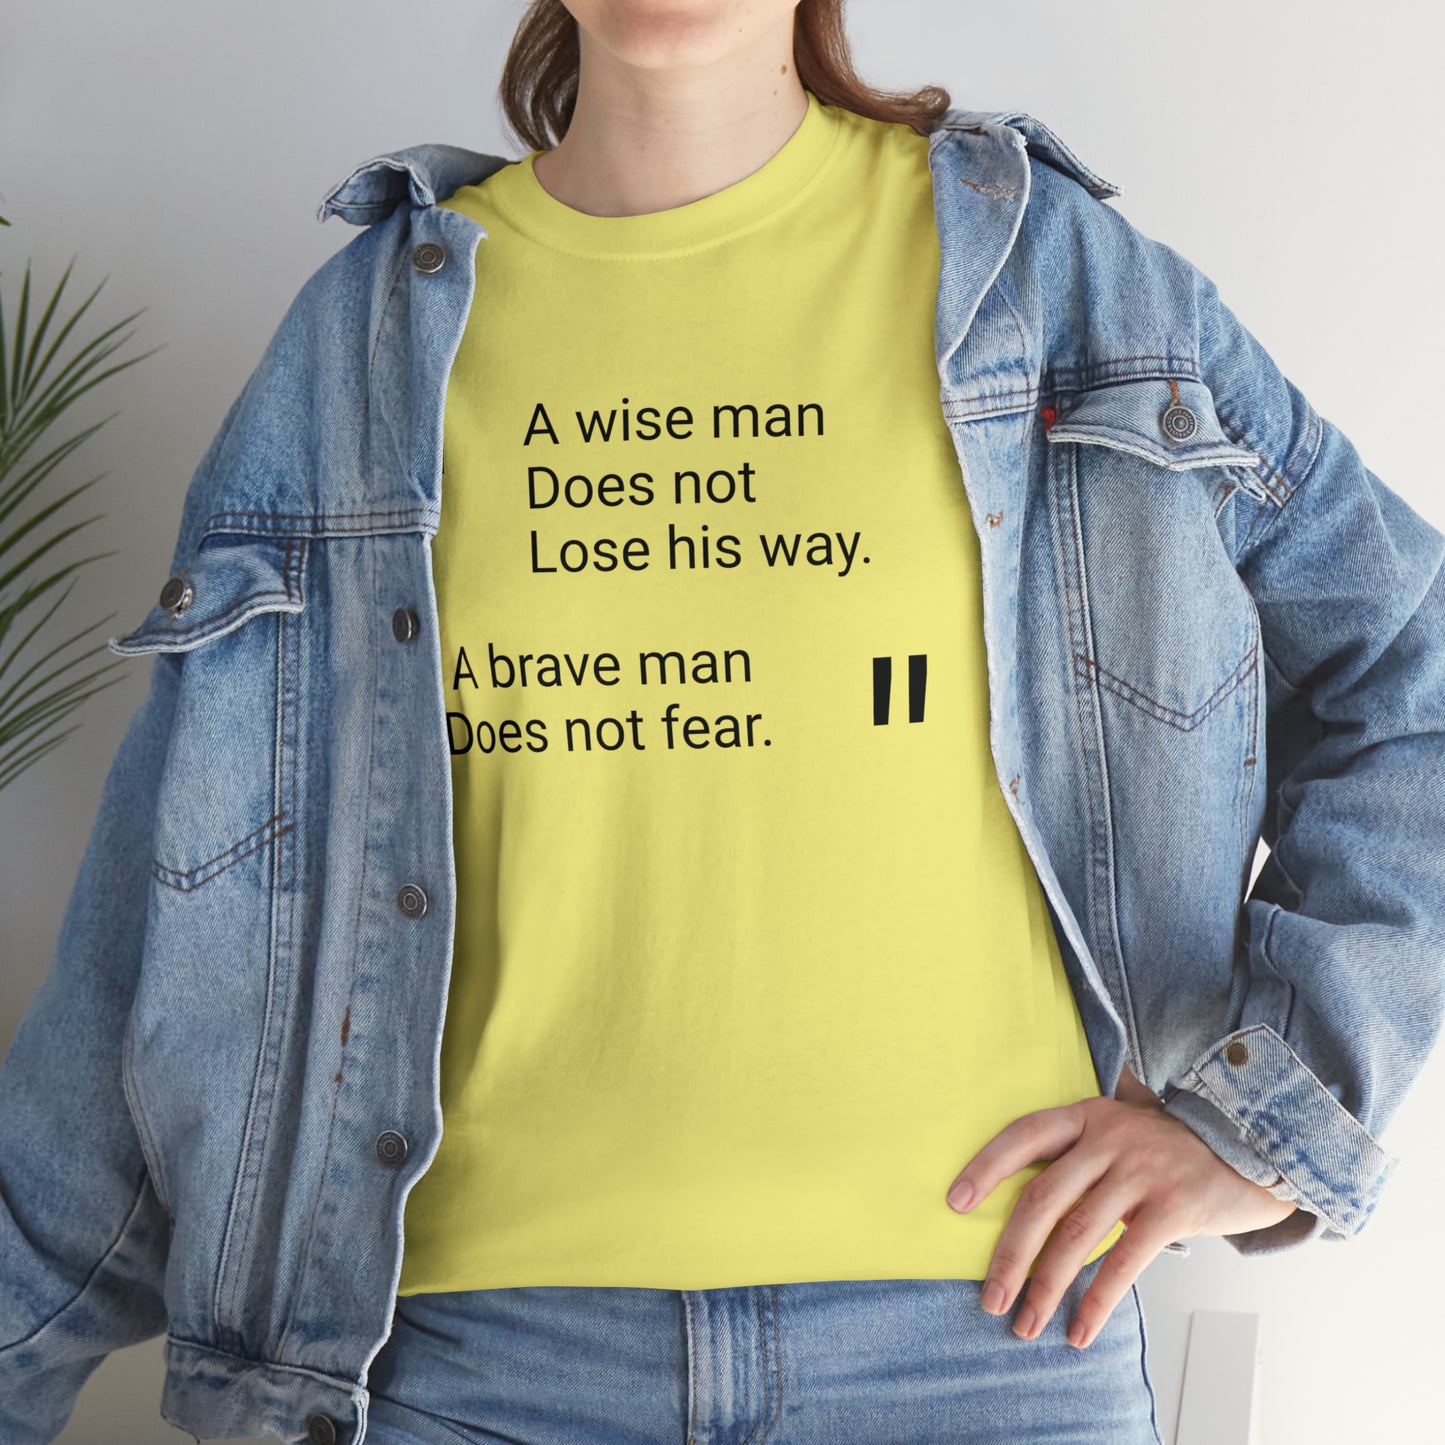 A Wise Man Does Not Lose His Way. A Brave Man Does Not Fear. T-Shirt